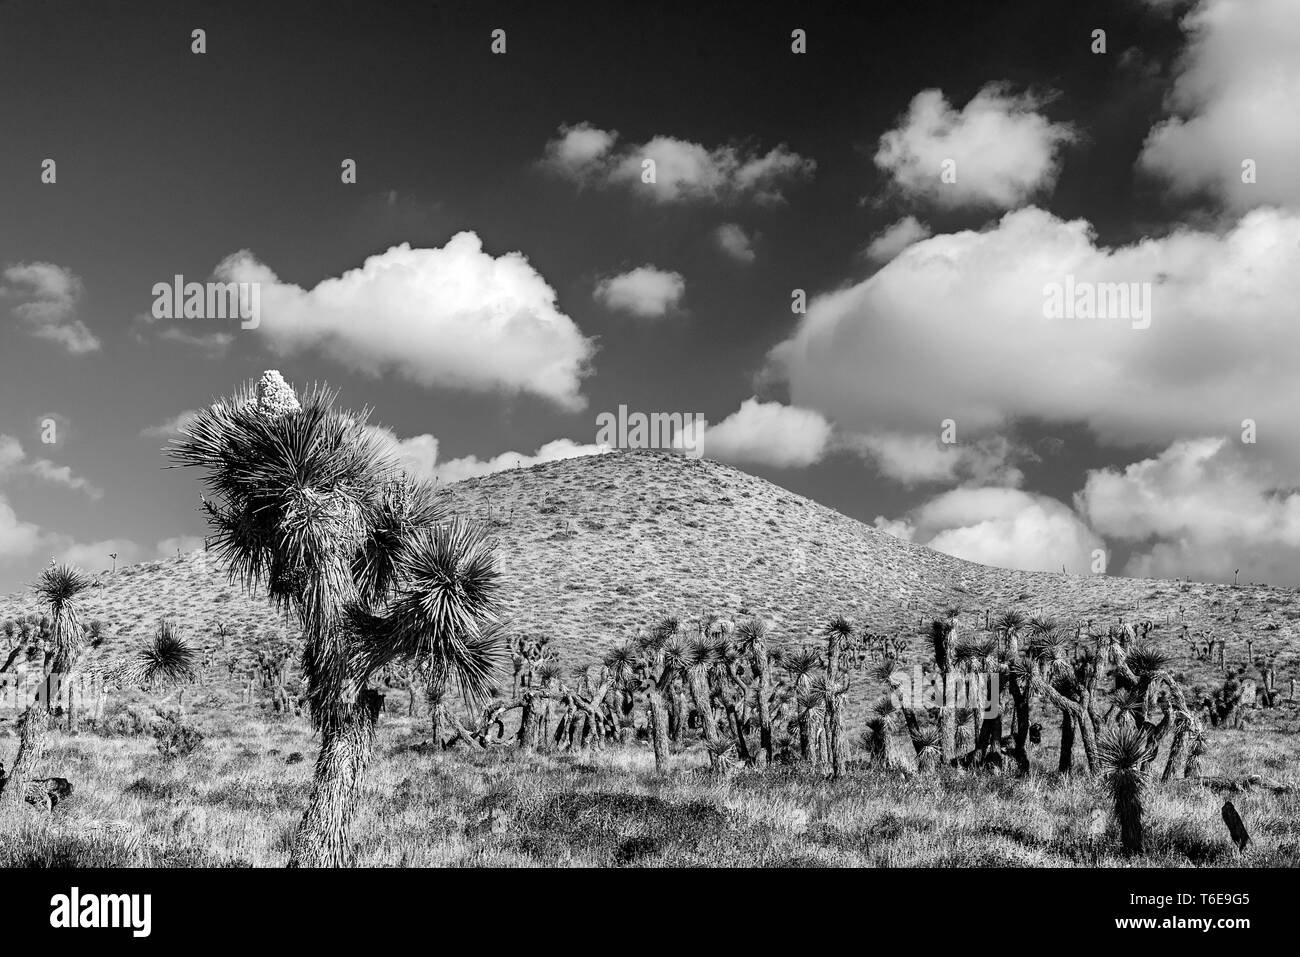 Joshua trees in Mojave desert with hill beyond under a sky with white fluffy clouds. Black and white. Stock Photo